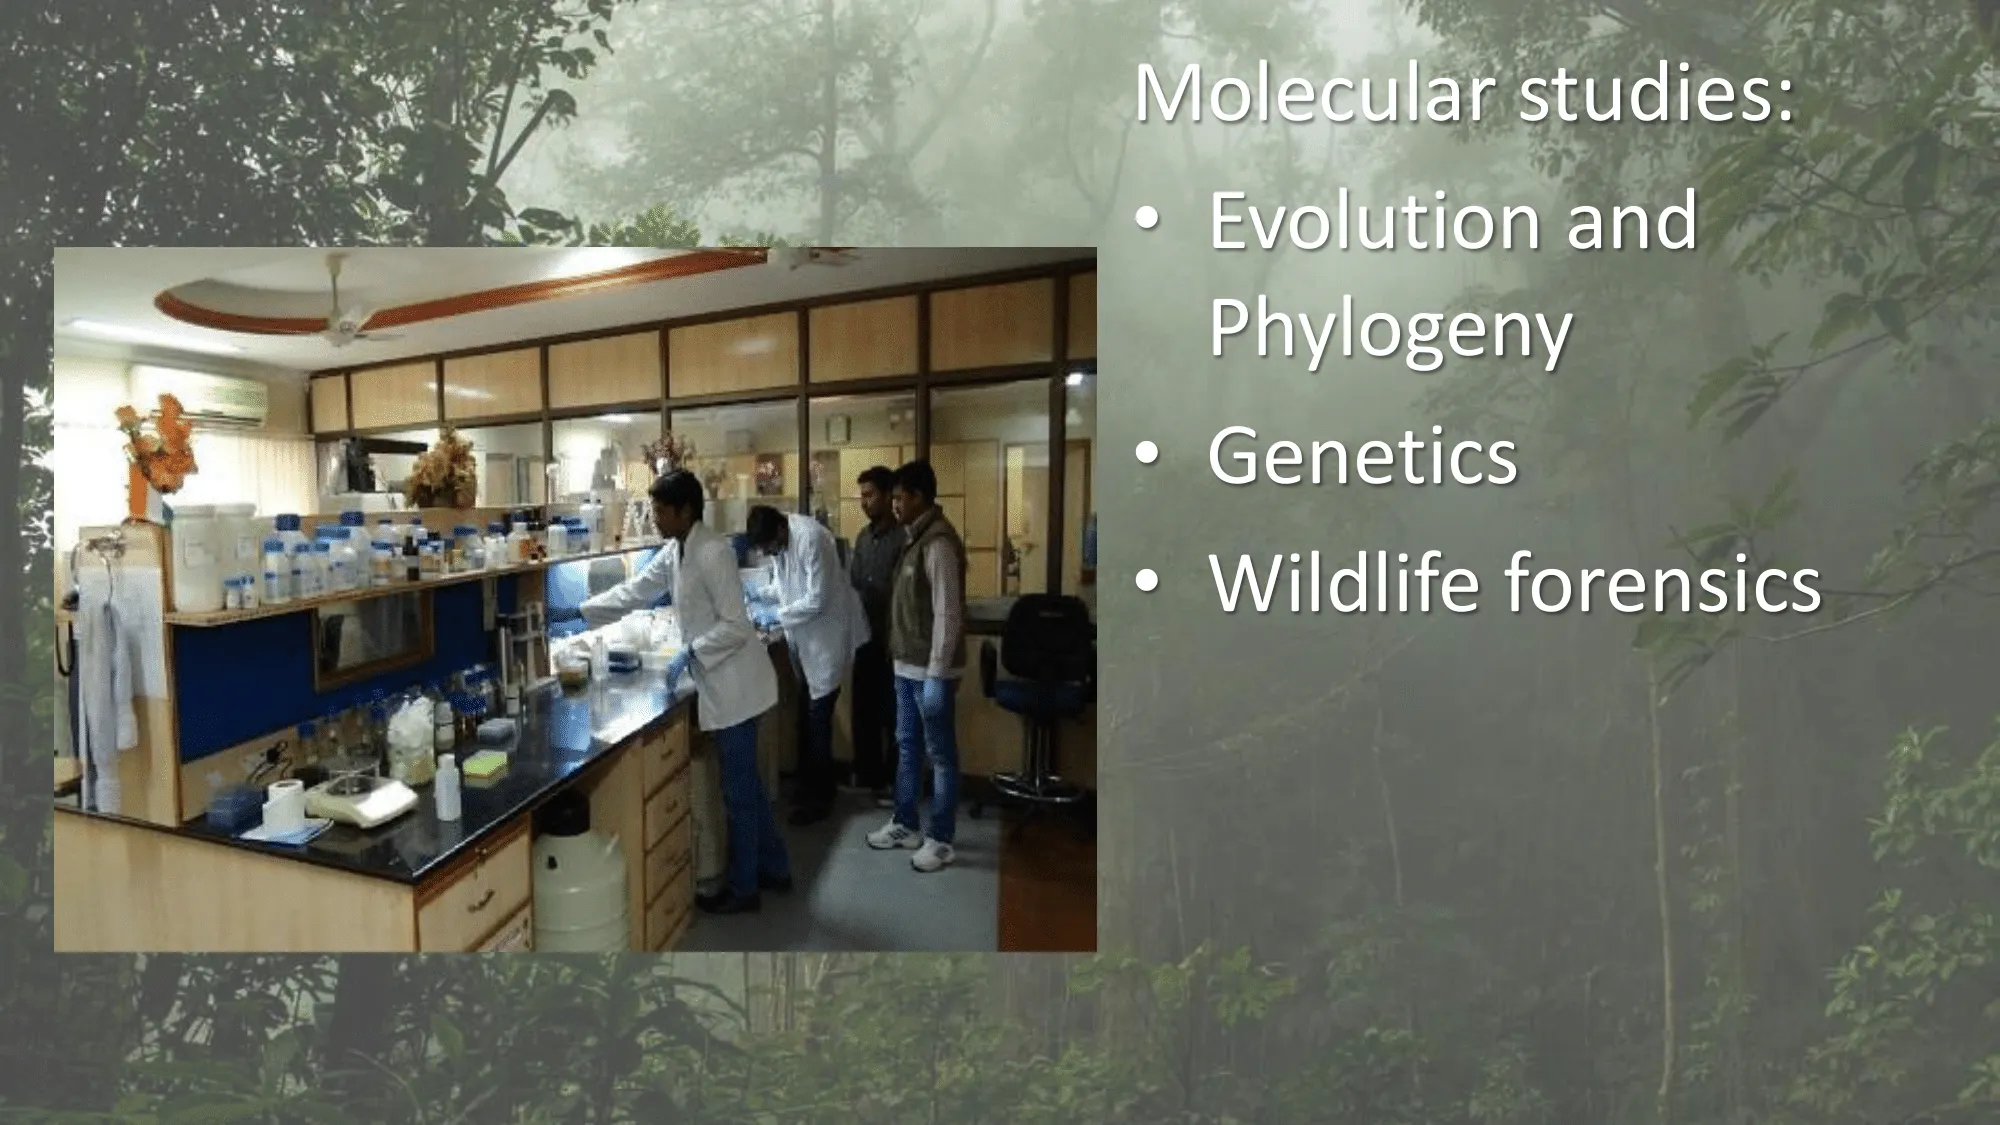 Molecular studies include evolution and phylogeny, genetics and wildlife forensics